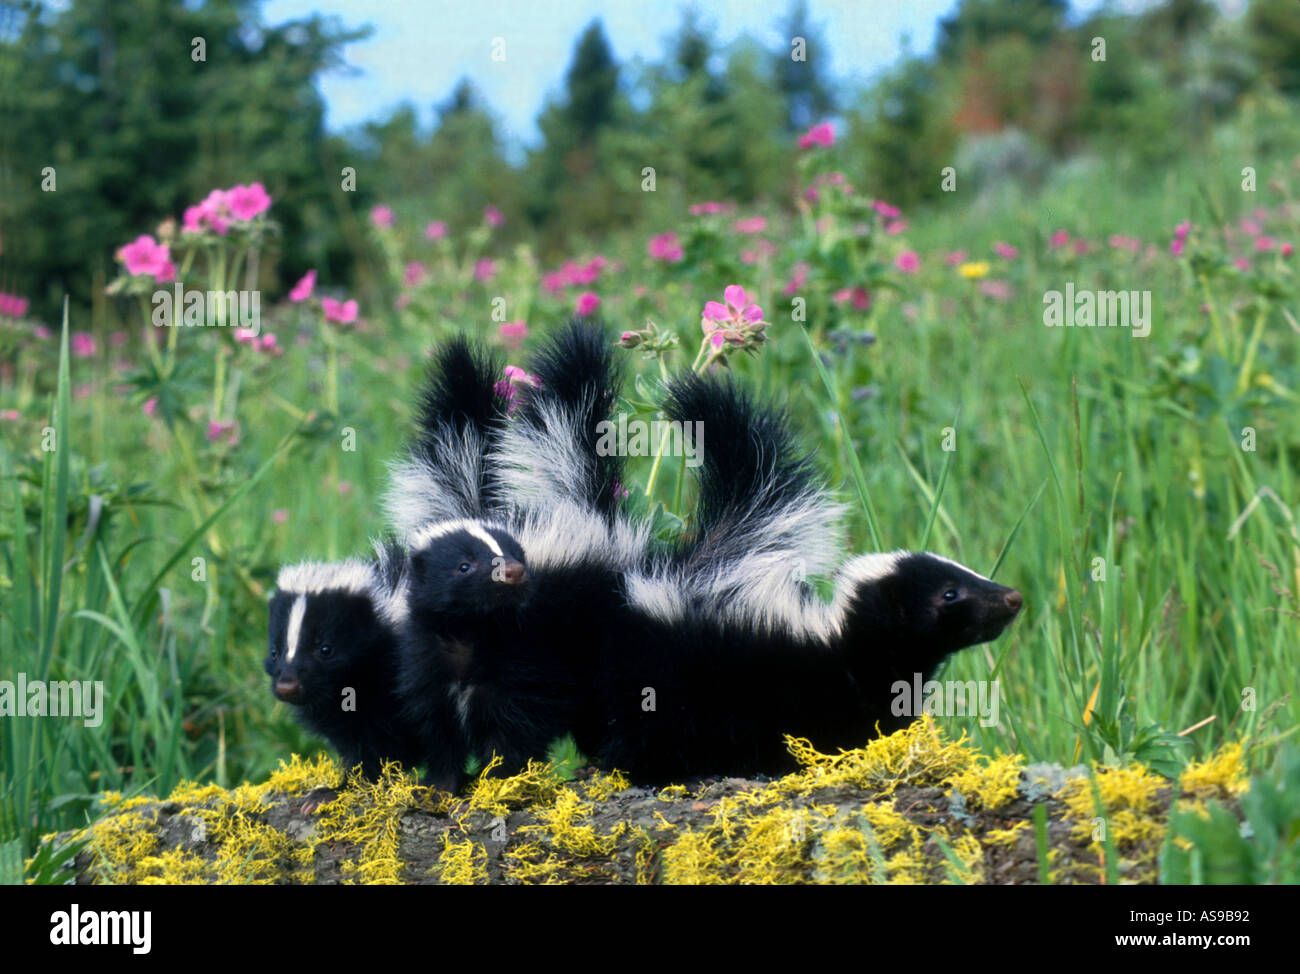 MS4-18 THREE BABY STRIPED SKUNKS AND FLOWERS Stock Photo